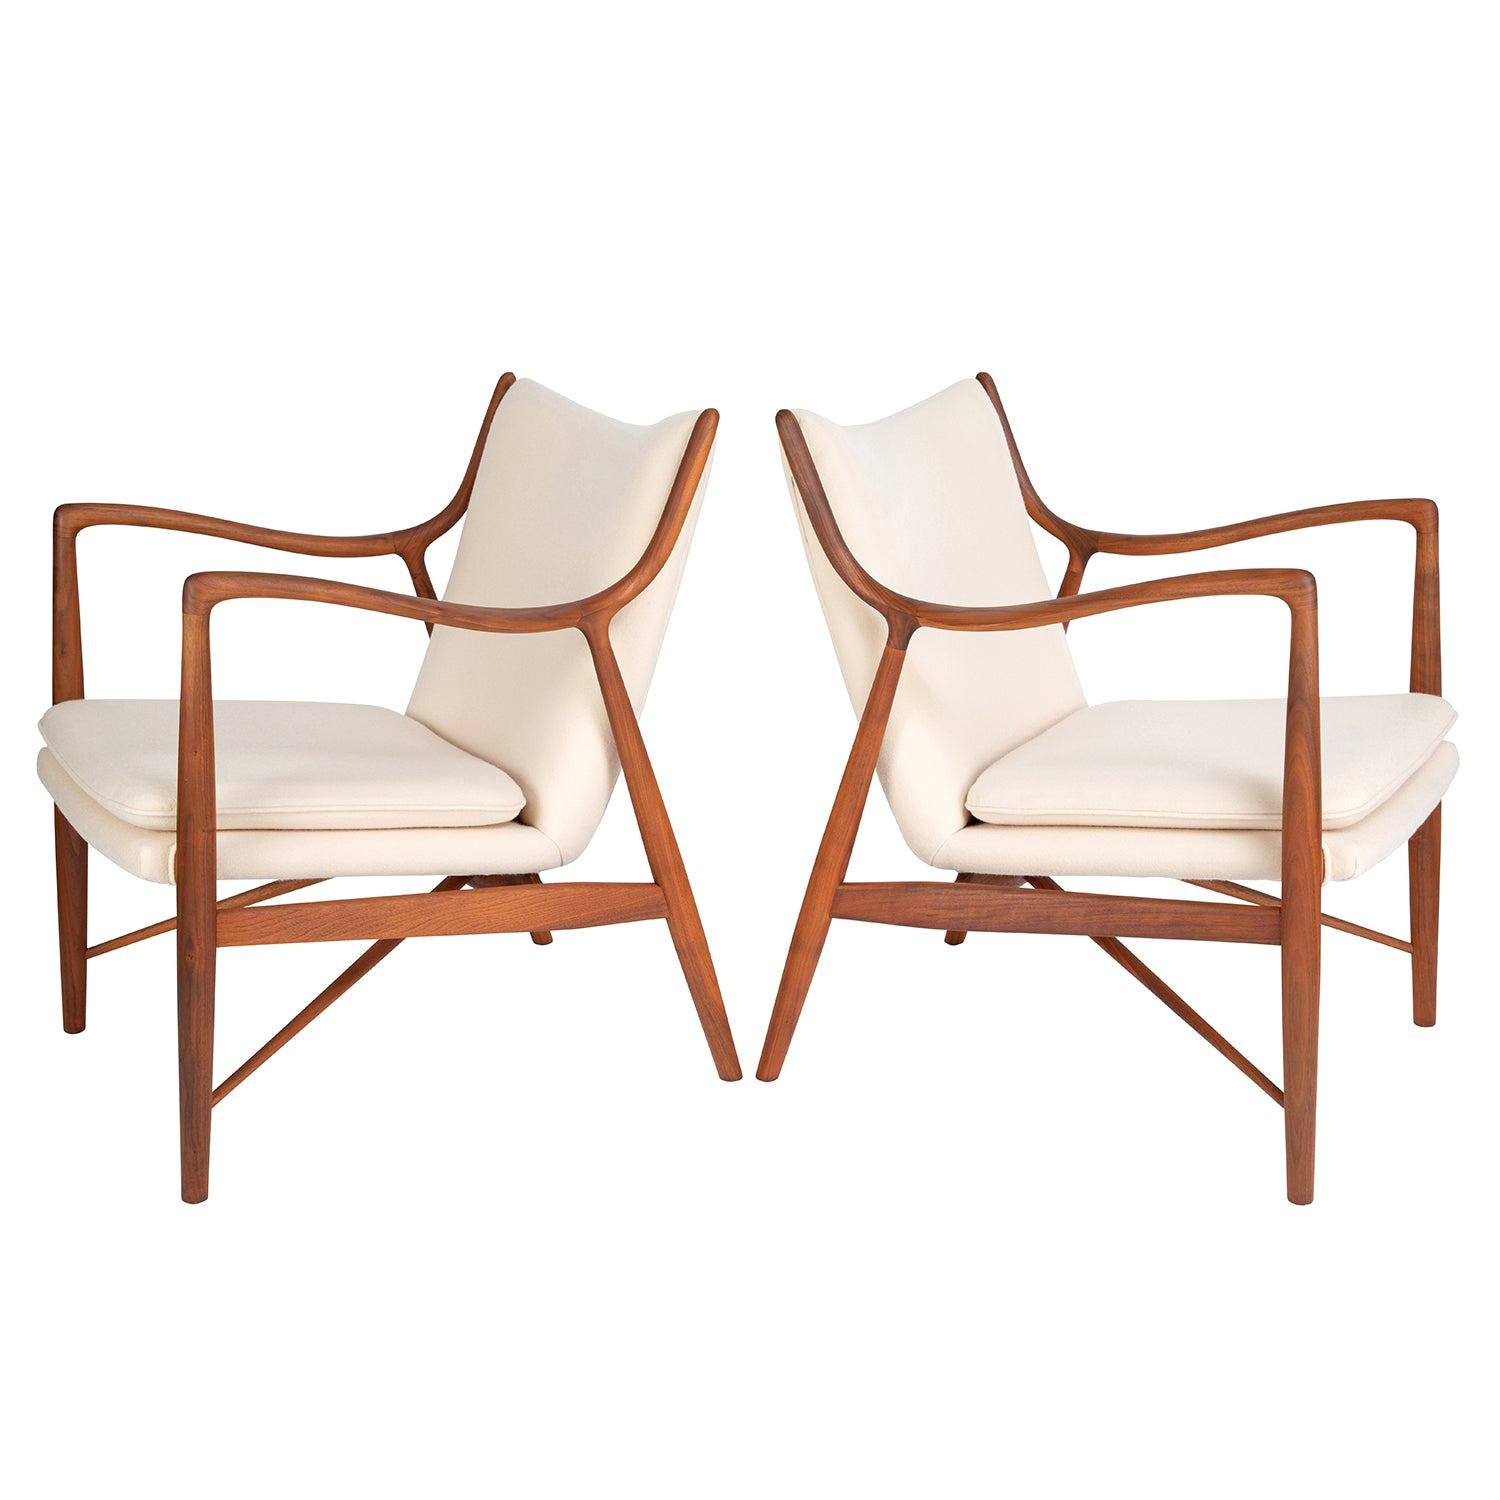 Finn Juhl Pair of Iconic "45" Lounge Chairs, 1950s